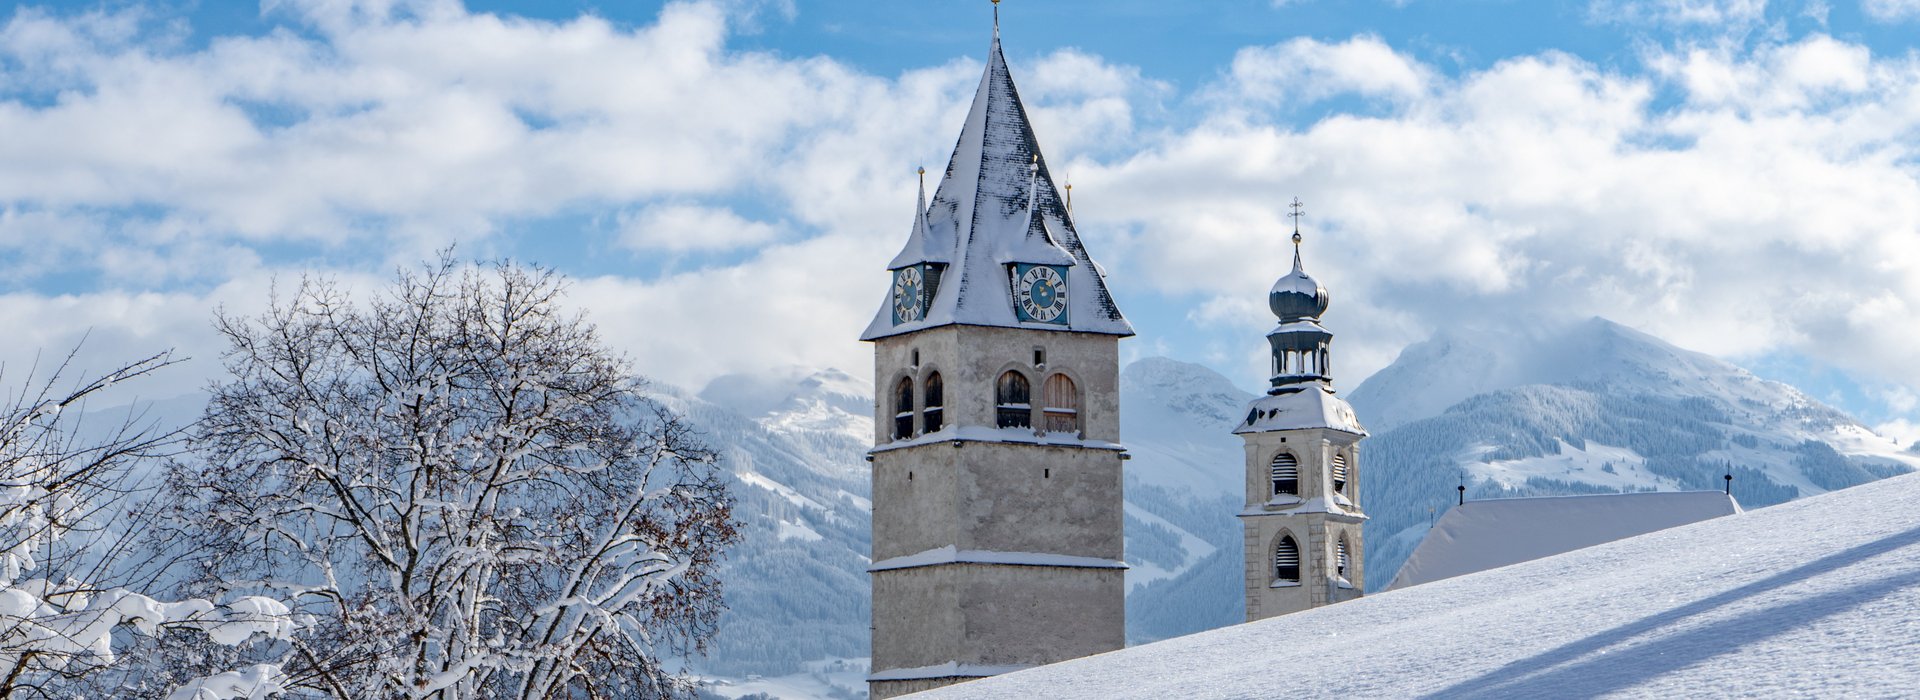 Snowy church with view of Kitzbühel south mountains